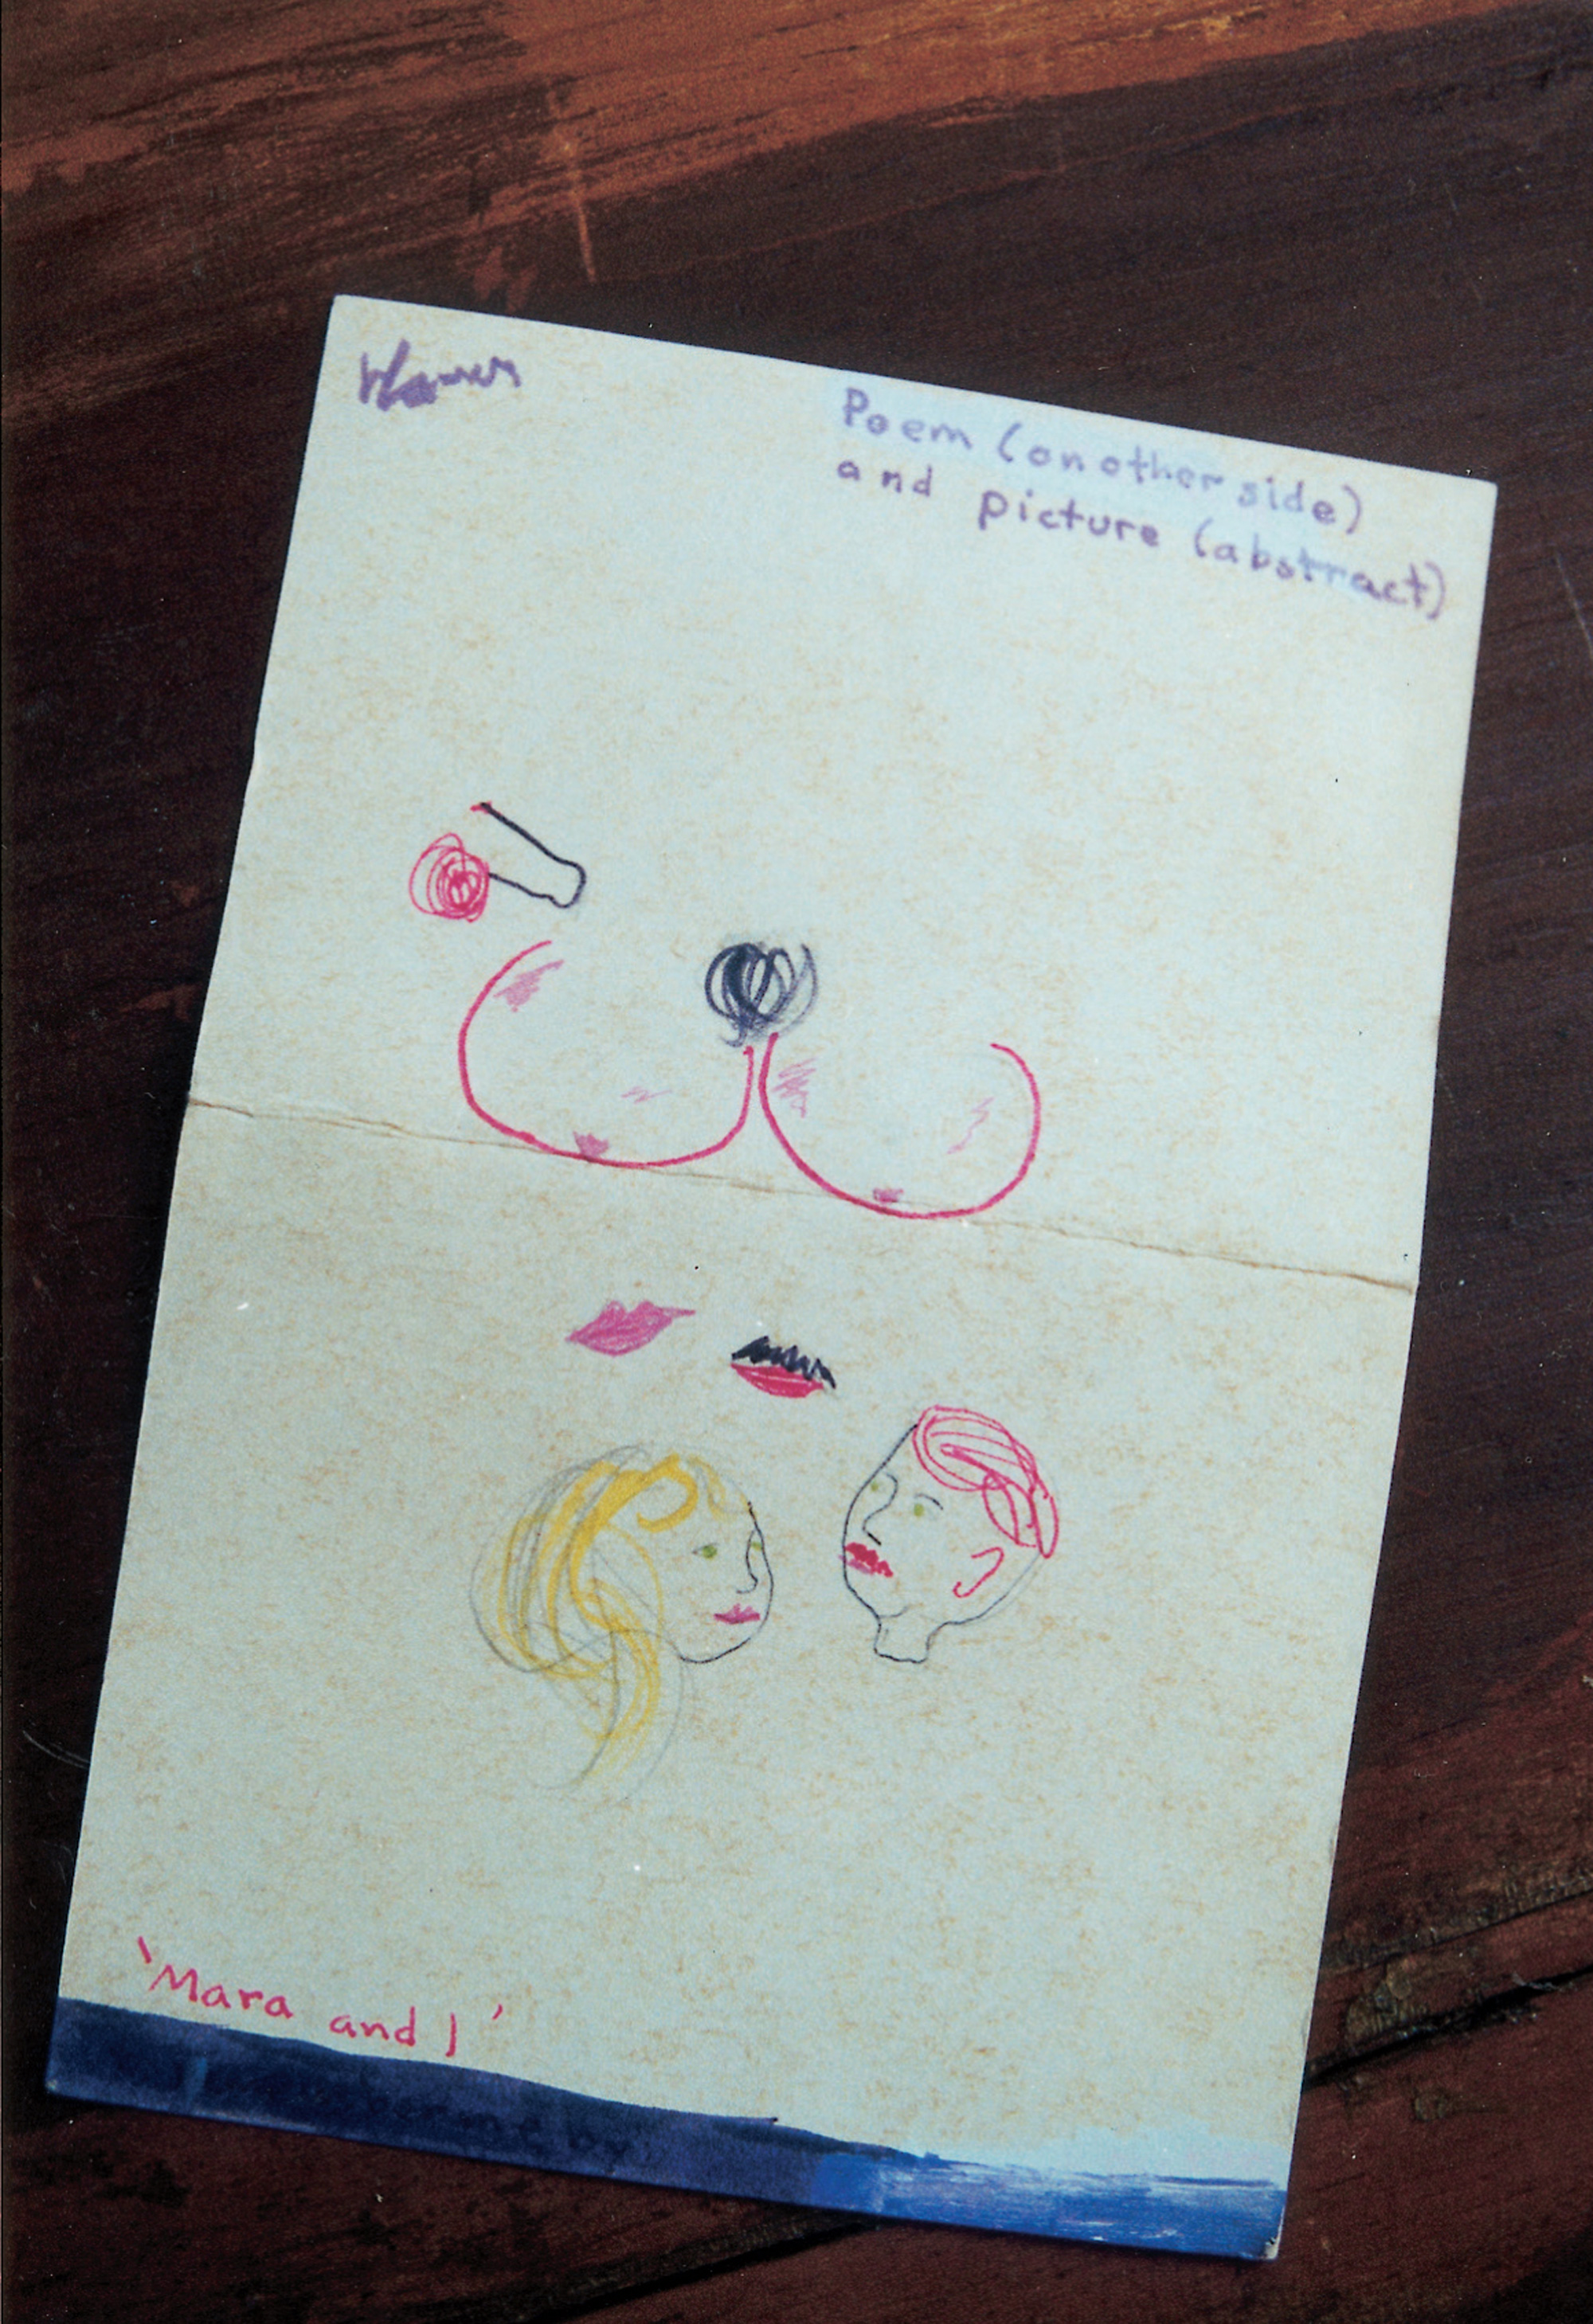 A photograph depicting a piece of card with drawings on it. The caption reads: Poem printed in pencil (verse) and red magic marker (chorus) on inside of folded index card and signed by Harvey in pencil. On the other side of the card is a vivid semi-abstract mixed-media drawing (pencil, magic marker and white-out) with distinct sexual overtones, signed in purple marker by Harvey and with the title, “Mara and I” printed on it in red marker, as well as a redundant legend in purple identifying this as a “picture (abstract)”. The poem is a stellar example of that combination of sentimentality and ribaldry so characteristic of Harvey. Displaying his gift for drawing as well as poesy, and signed on both sides, this may be the most precious item in the collection.

Ah... Mara...
to feel you, warm and yielding
against my strong chest,
is bliss
Ah... Mara...
The glorious oneness I feel
with your innocent lips
upon mine, which I never
feel otherwise, (except when
it’s Melanie’s, Dawn’s, Philisses, anne’s [sic] or Jenny’s lips)
Ah... Mara...
to feel warm and peaceful,
after fucking long & vigorously
with you,
is an experience I will never
forget
Ah... Mara... My fair queen
of love...
I adore you.